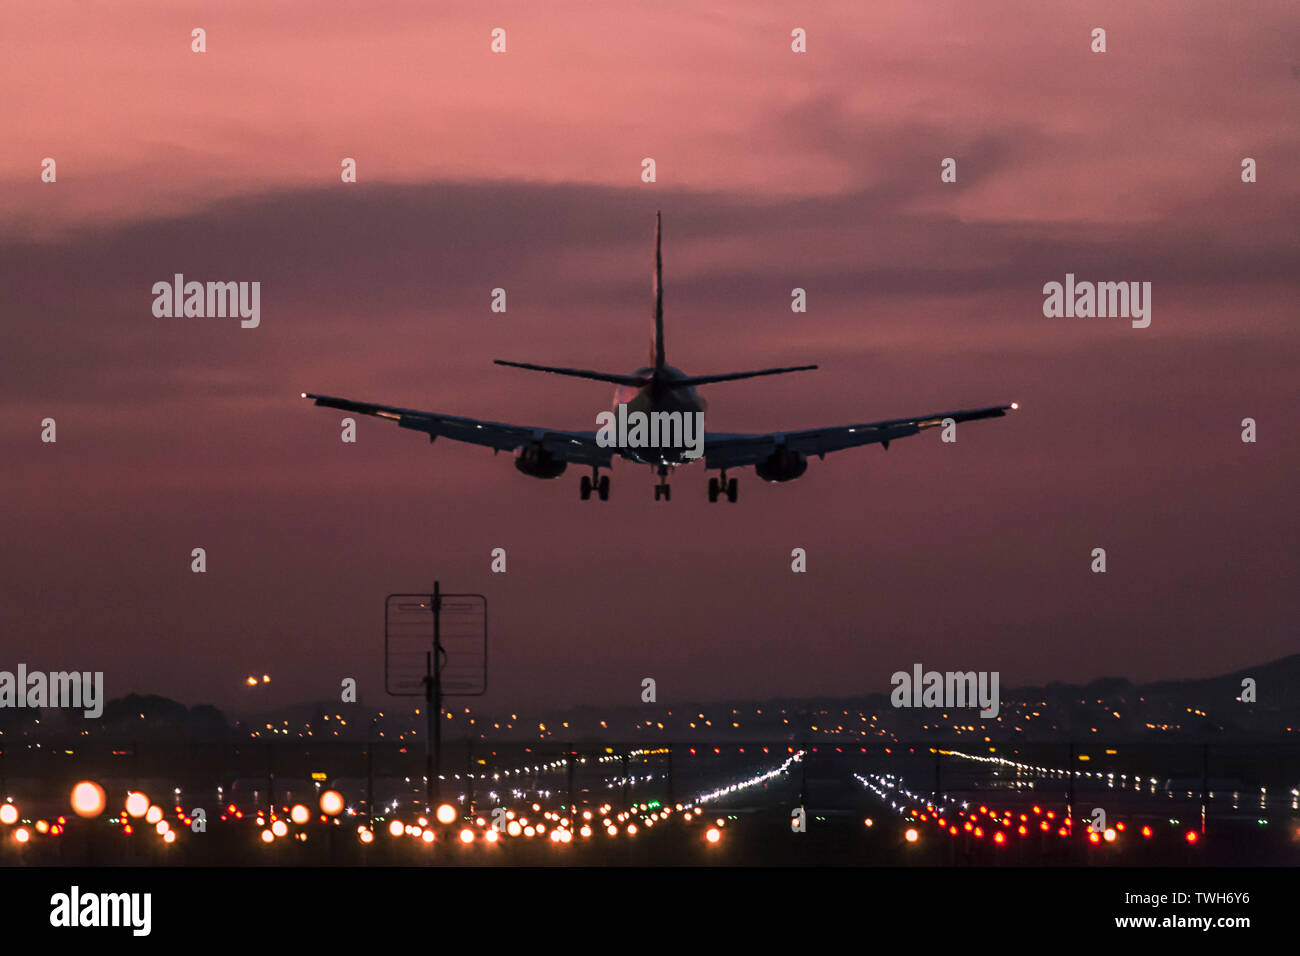 Passenger aircraft landing at the Cape Town International Airport at dusk with the landing strip clearly lit up. Stock Photo